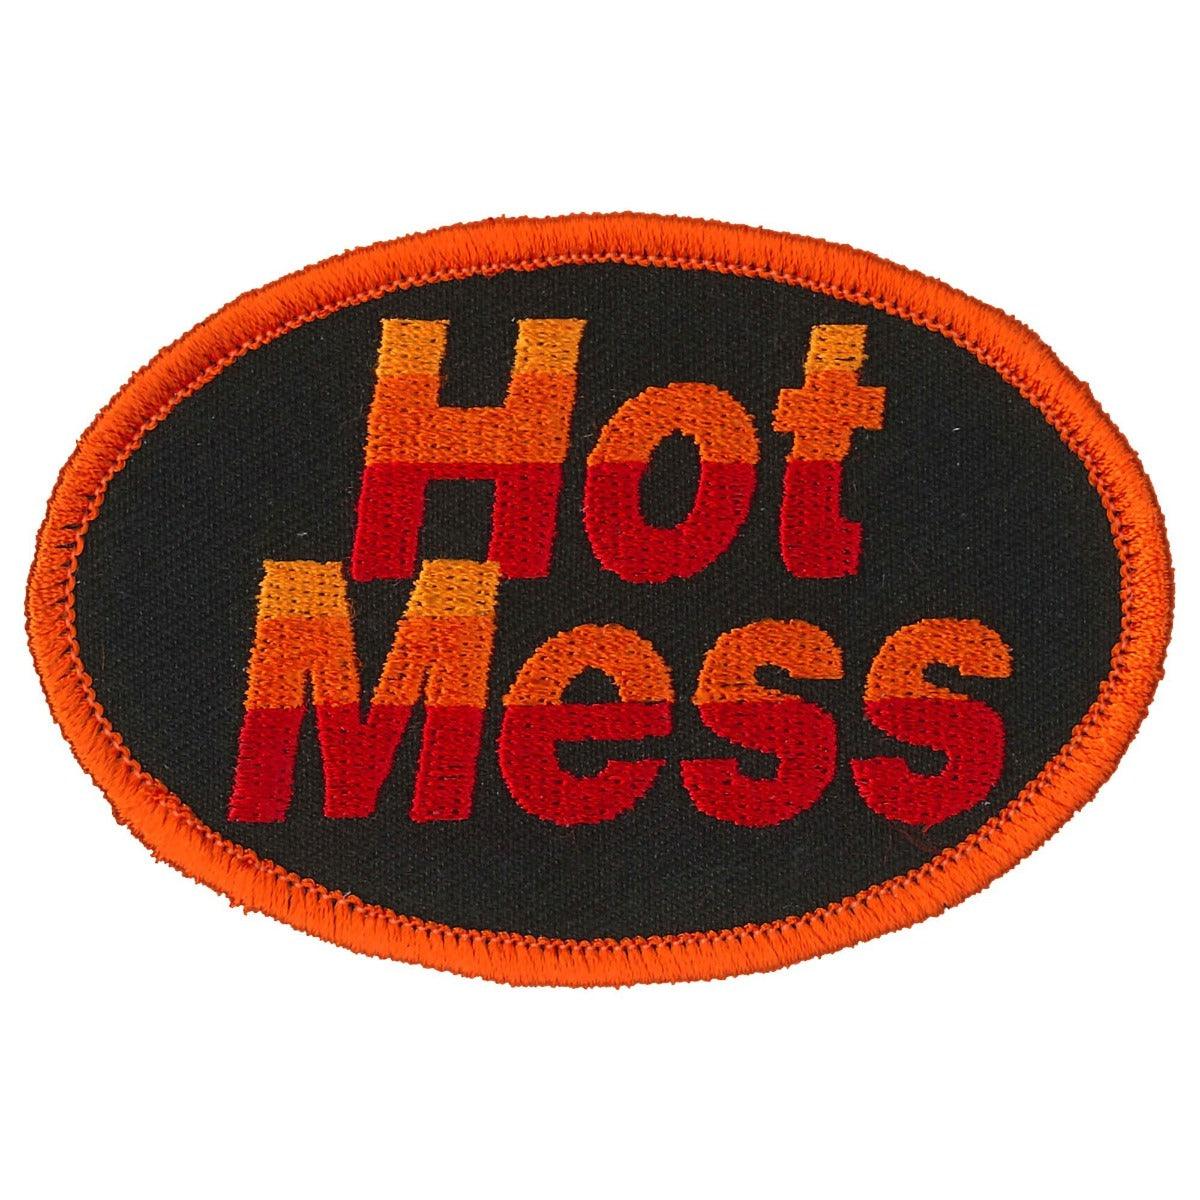 Hot Leathers Hot Mess Patch - American Legend Rider